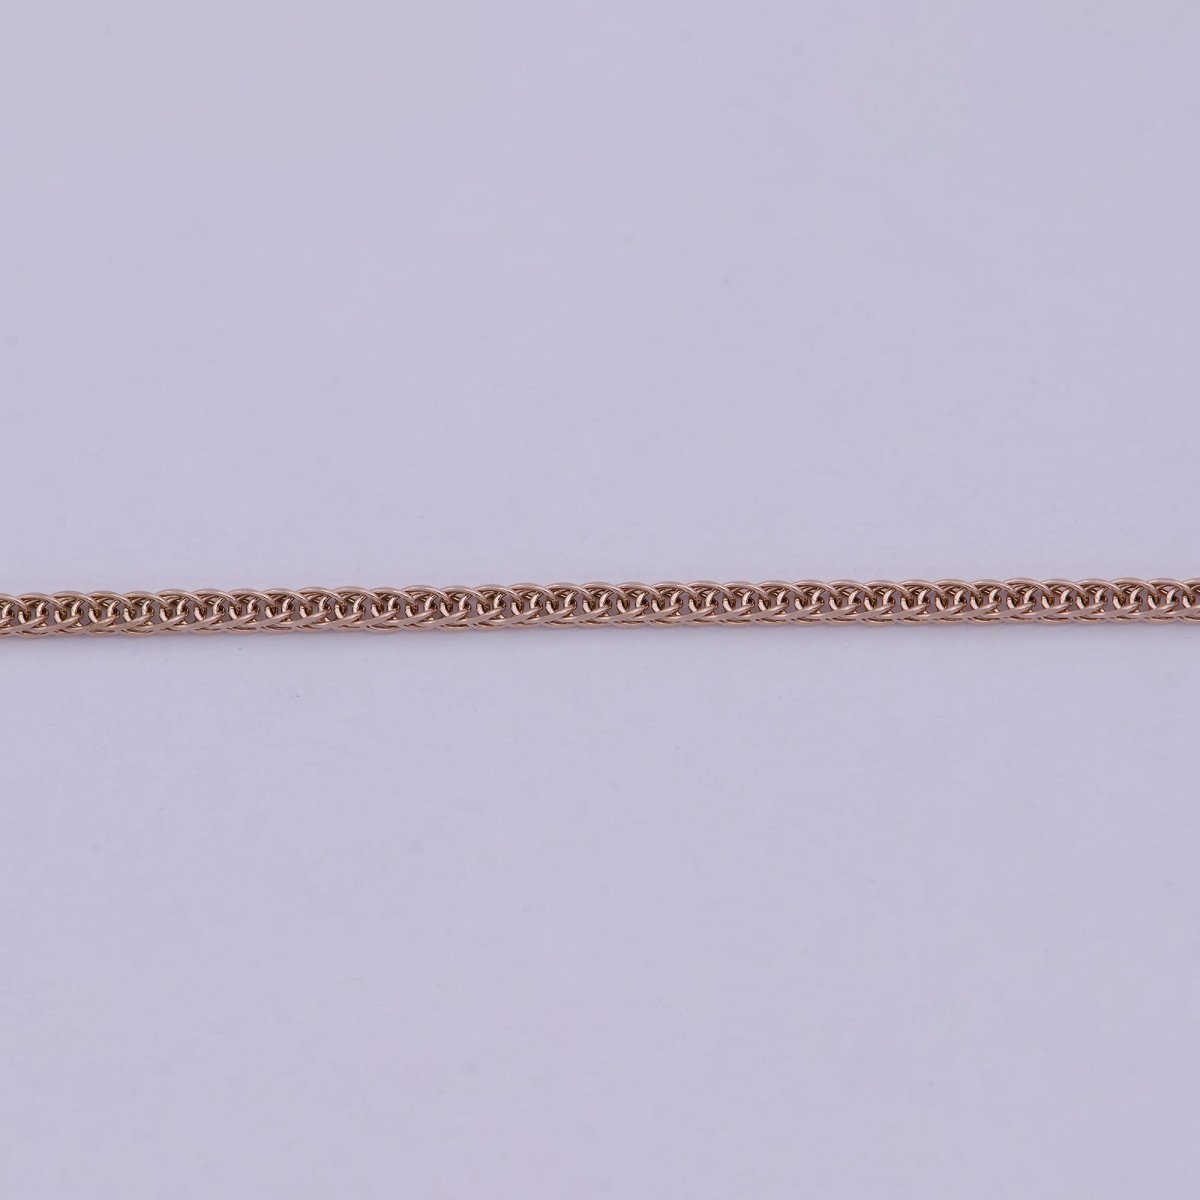 Rose Gold Fox Tail Chain Necklace - 18K Gold Plated Foxtail Chain - Dainty 1.4mm Layering 20 Inch Ready To Wear Chain with Spring Ring | WA-515 Clearance Pricing - DLUXCA